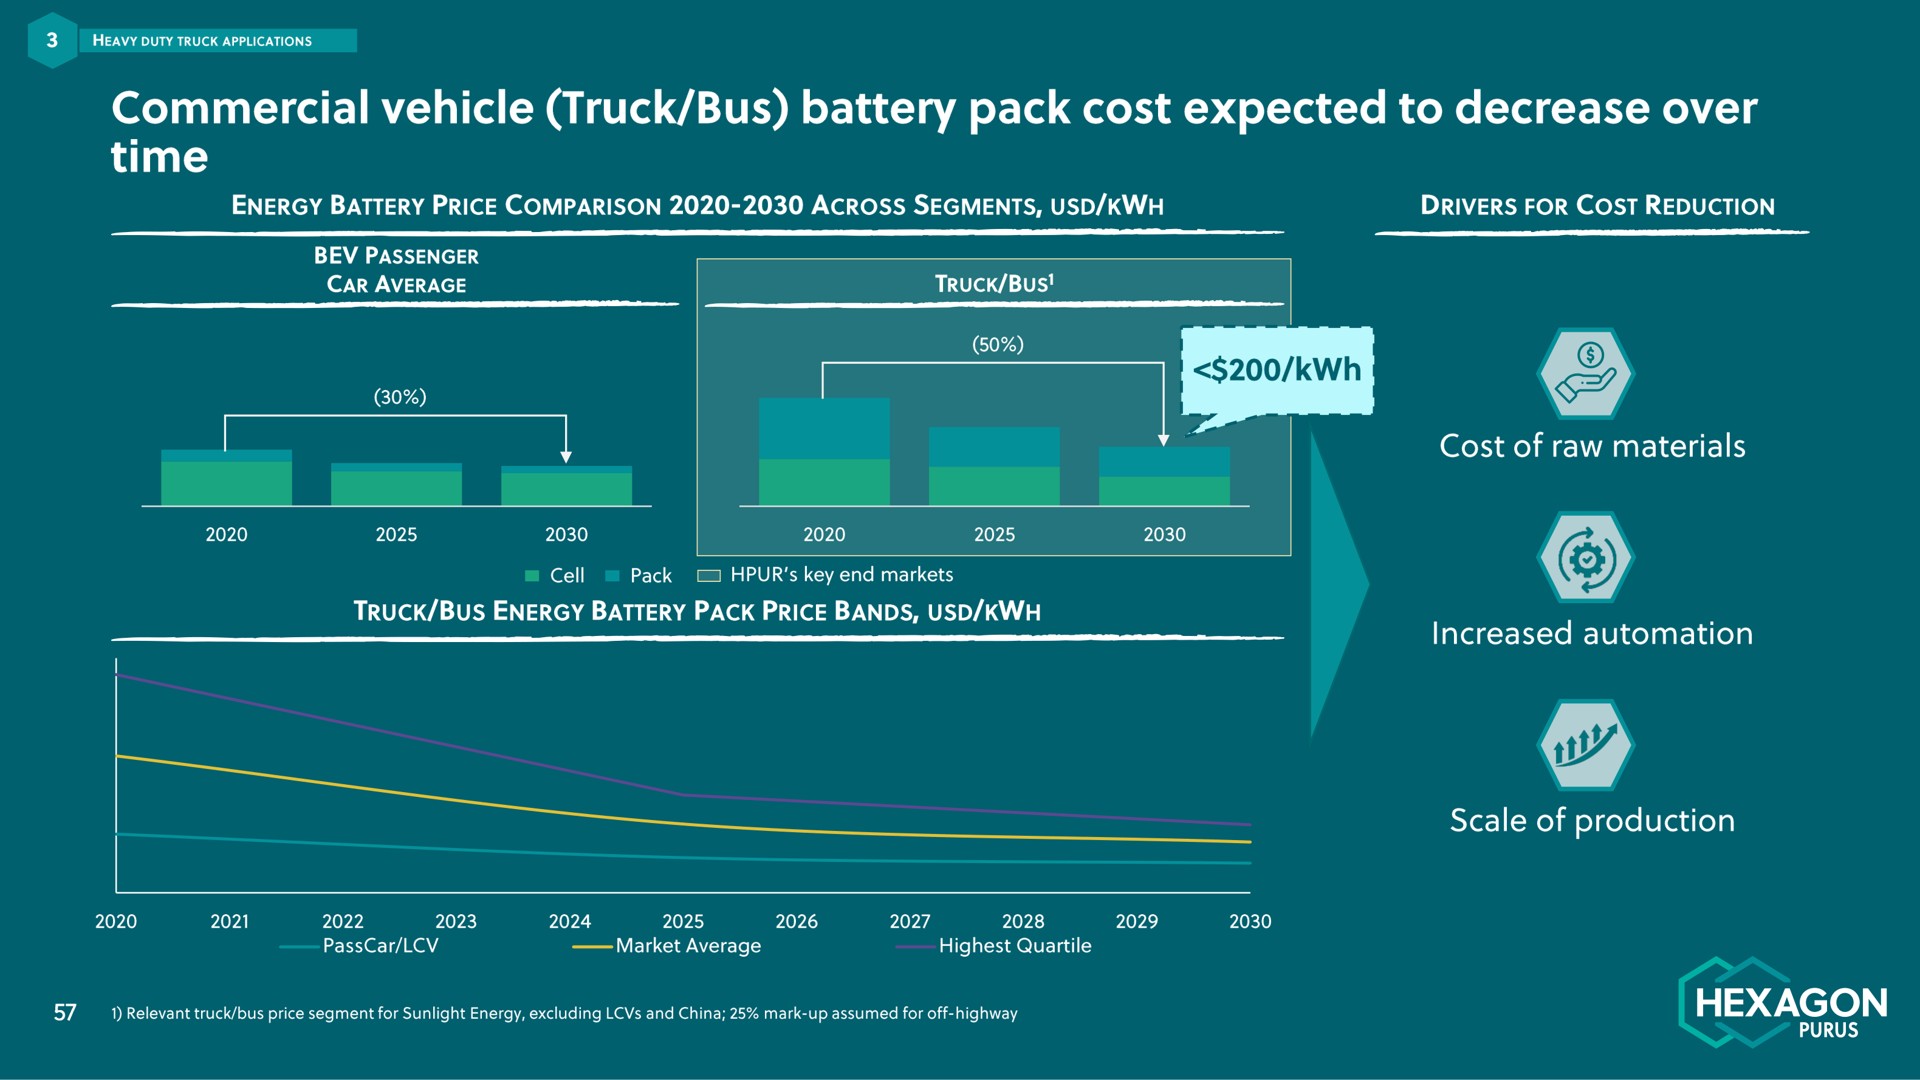 commercial vehicle truck bus battery pack cost expected to decrease over time hexagon | Hexagon Purus